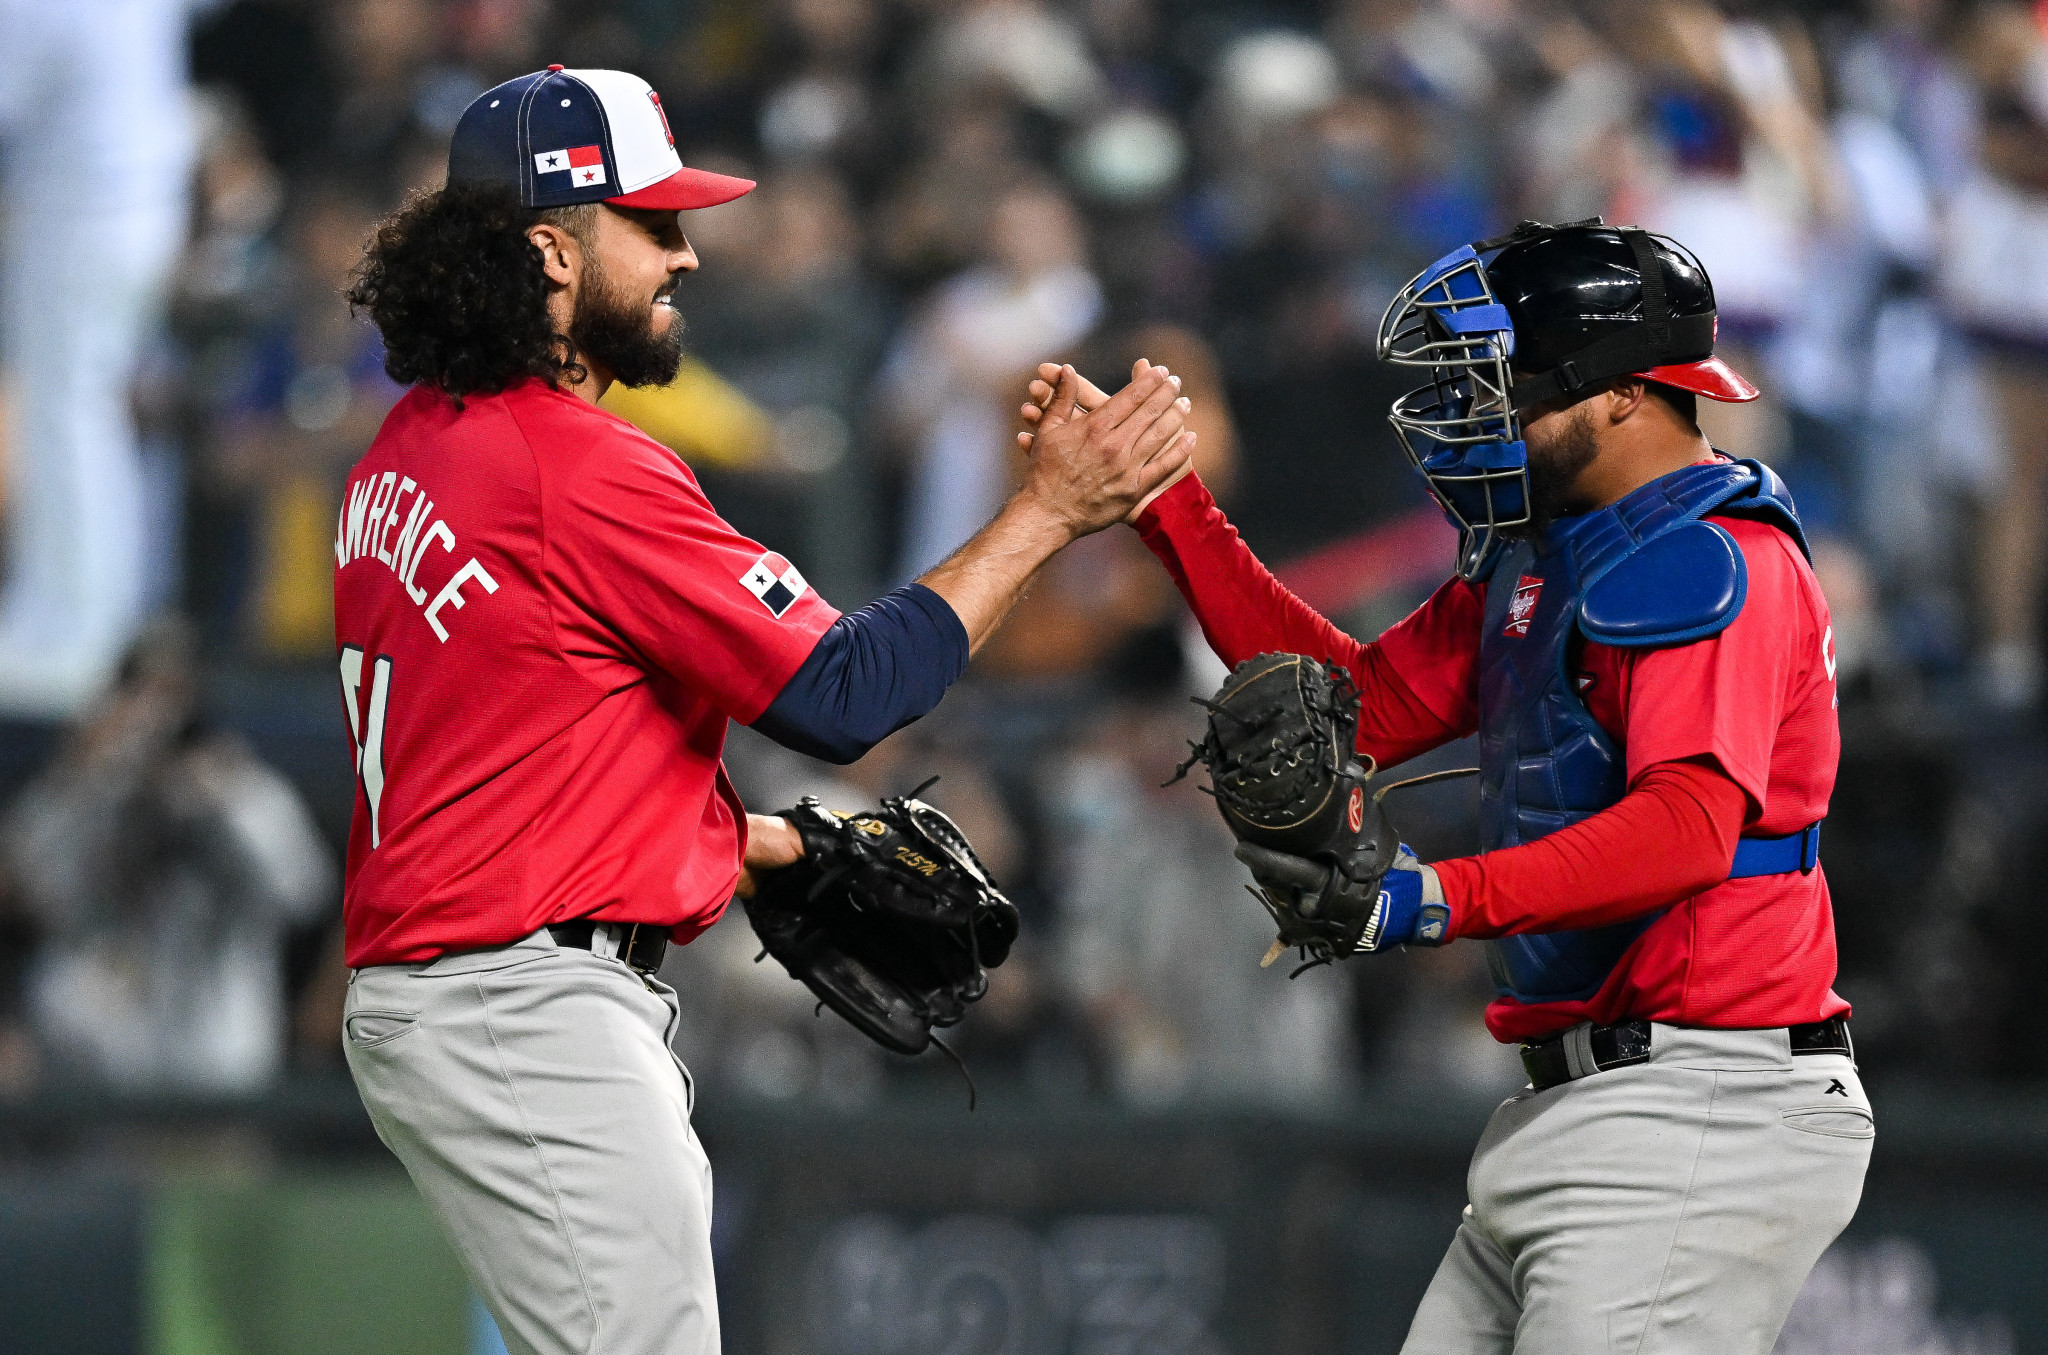 Panama surged to a 12-5 win against Chinese Taipei in the World Baseball Classic ©Getty Images